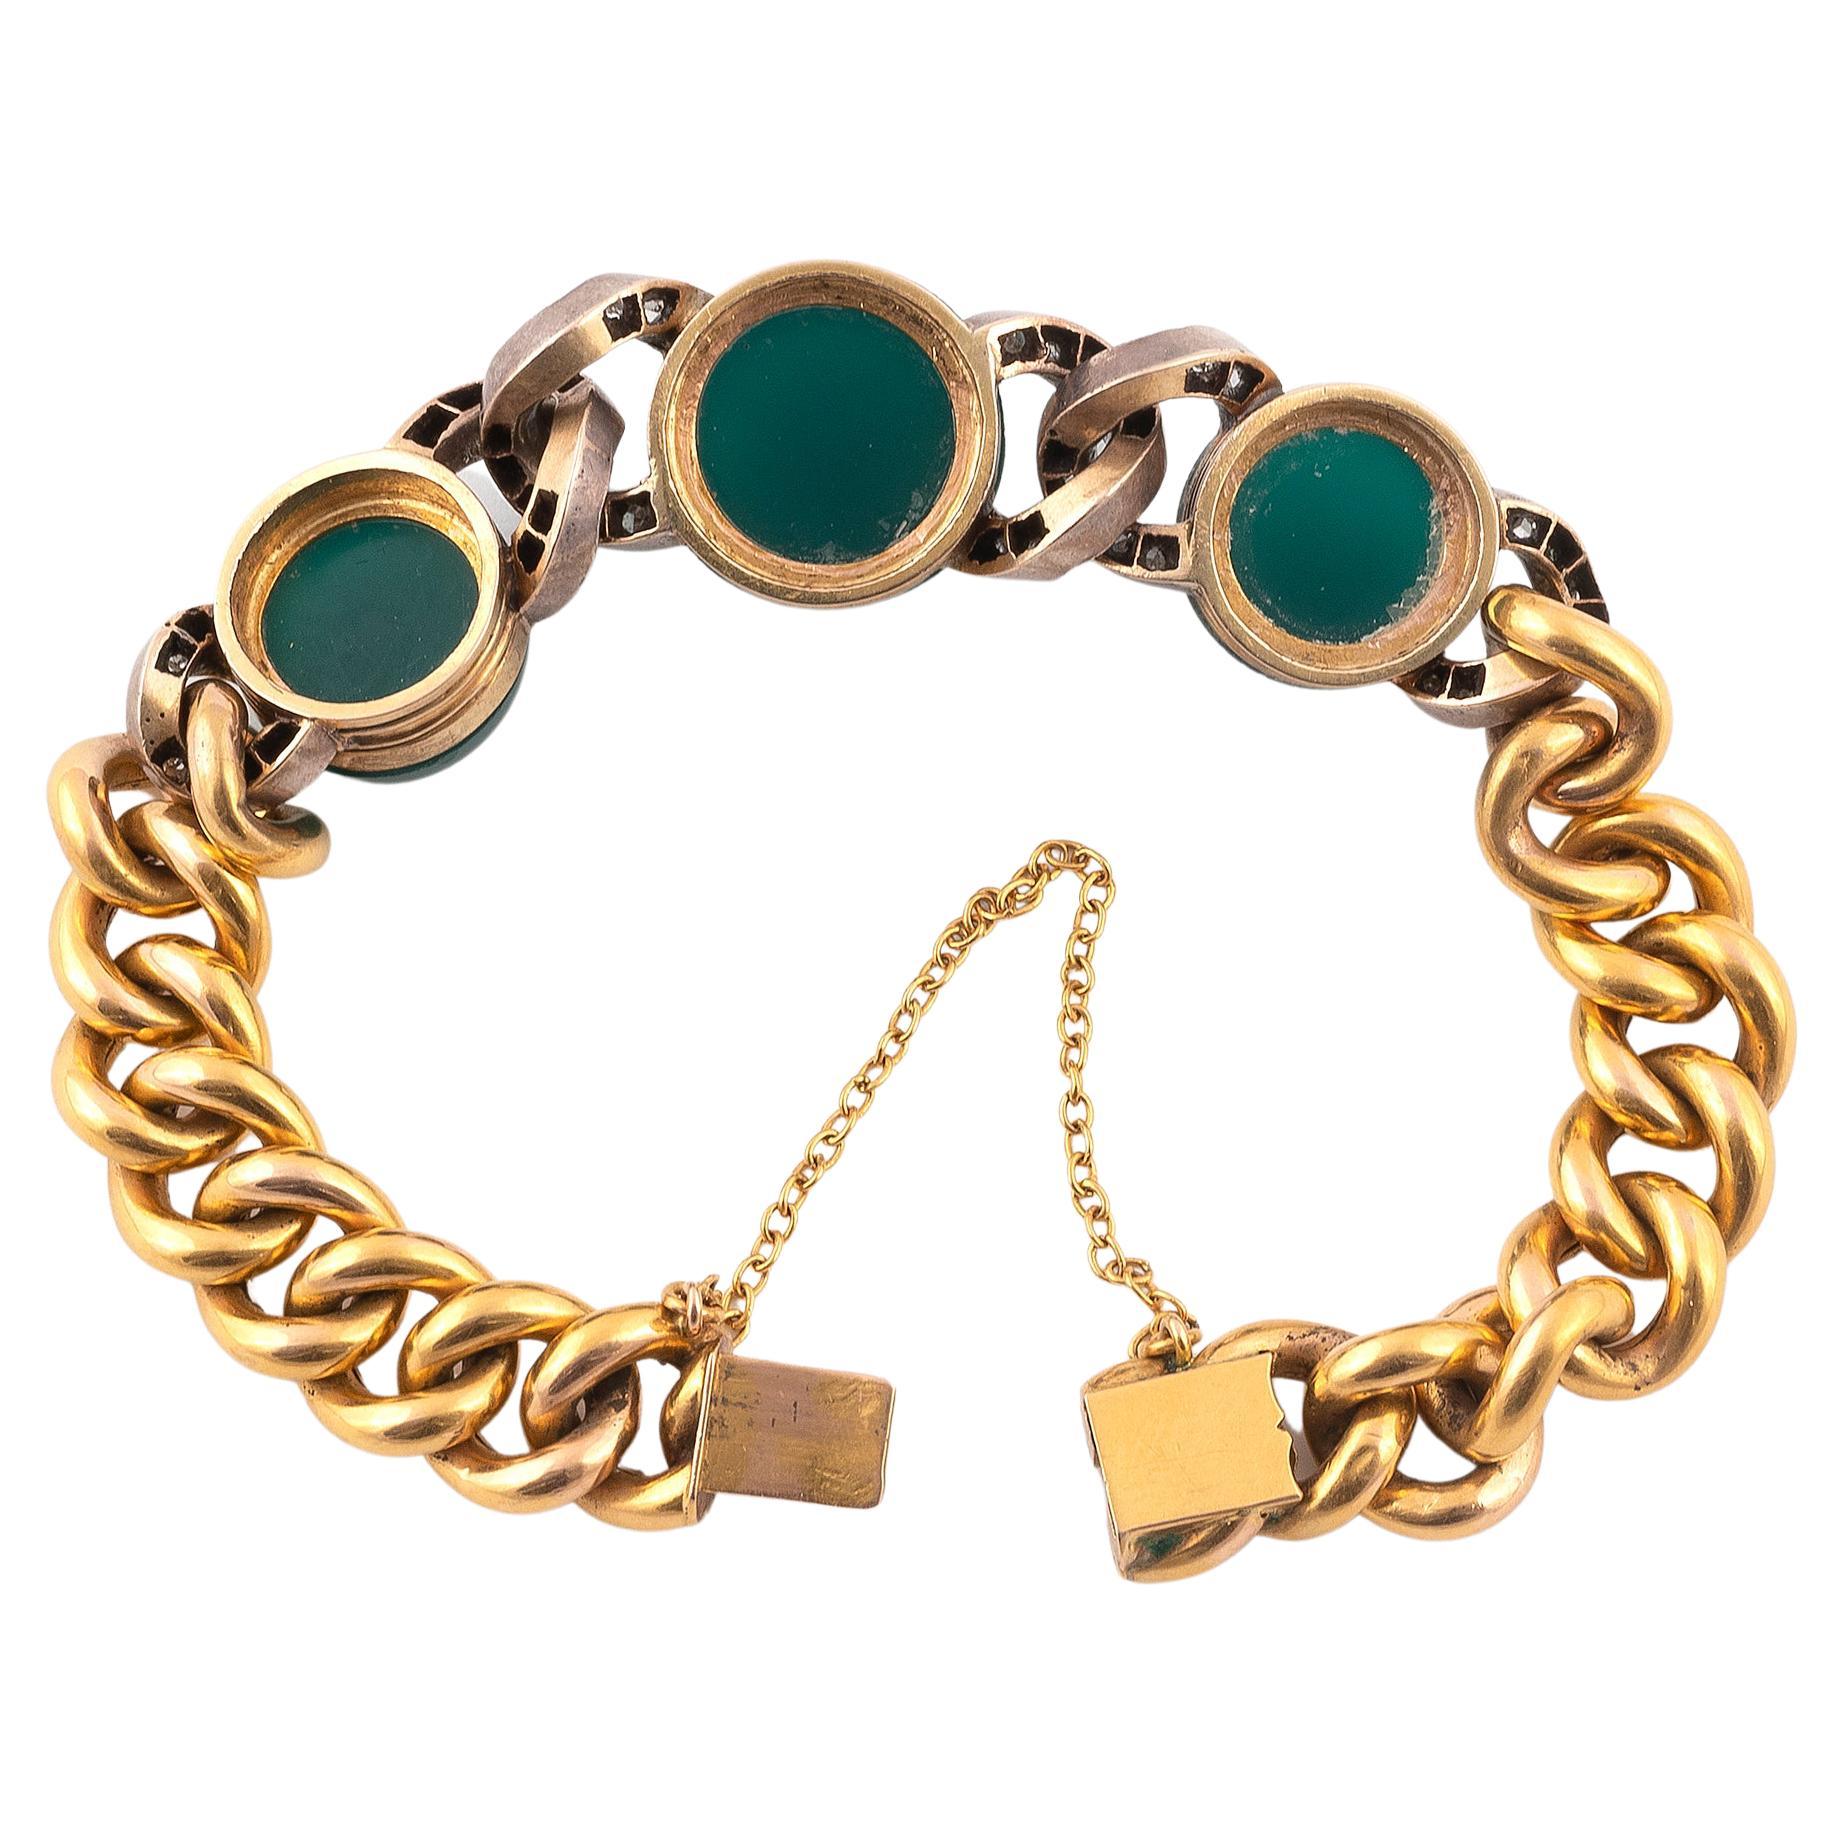 
Bracelet adorned with a curb link retaining three cabochons of green agate surrounded by links paved with rose-cut diamonds. Frame in yellow gold and silver. Safety at the clasp. French assaymarks, workshop mark . Wrist circumference: 17